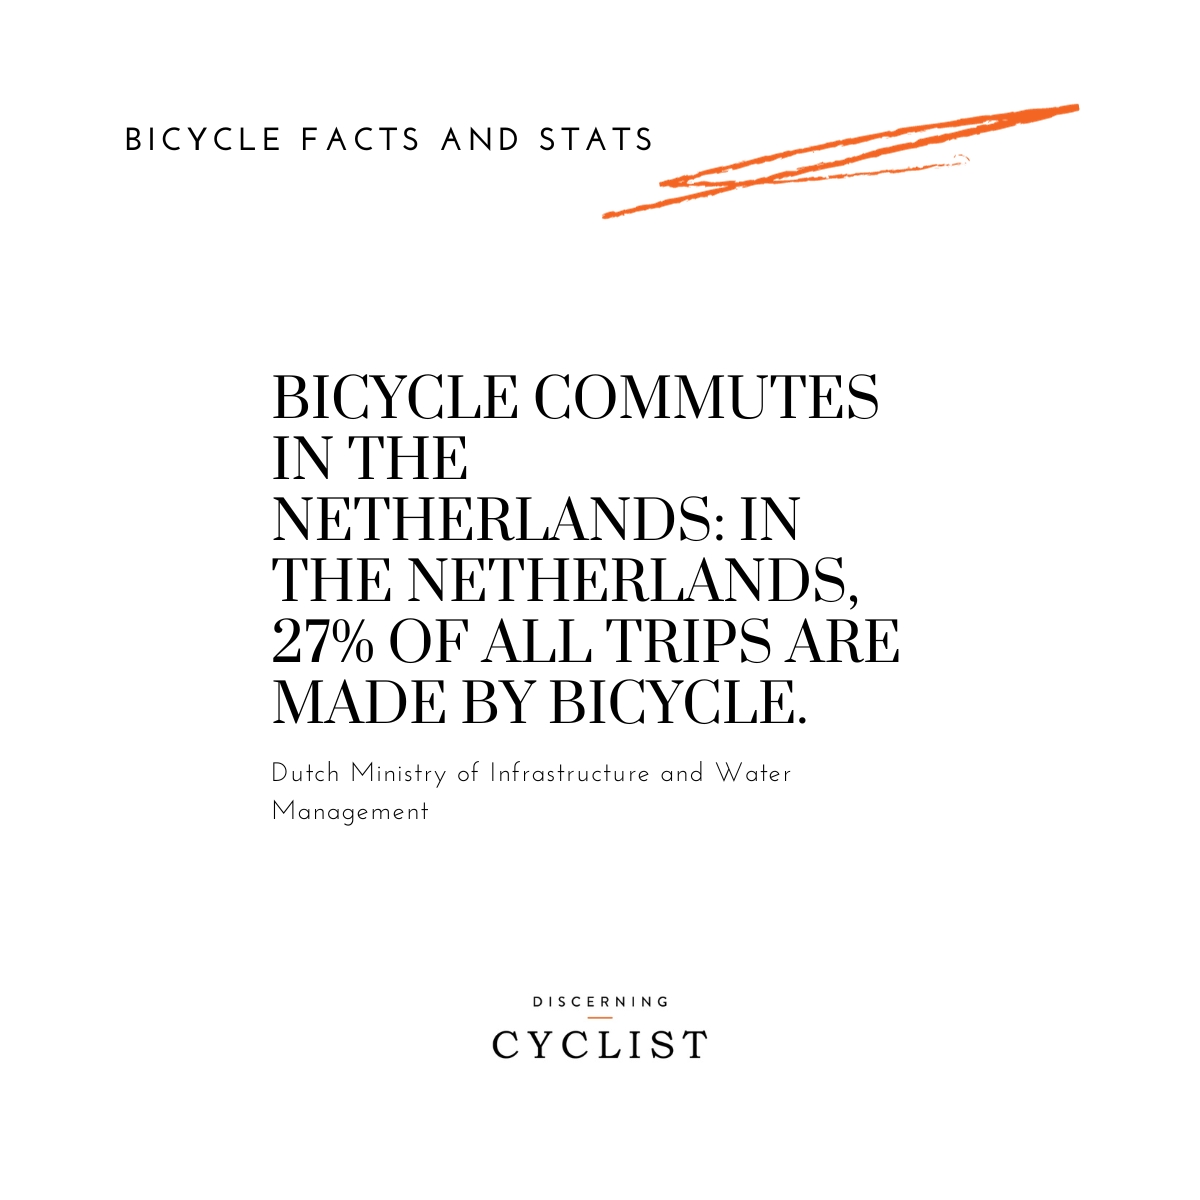 Bicycle Commutes in the Netherlands: In the Netherlands, 27% of all trips are made by bicycle.